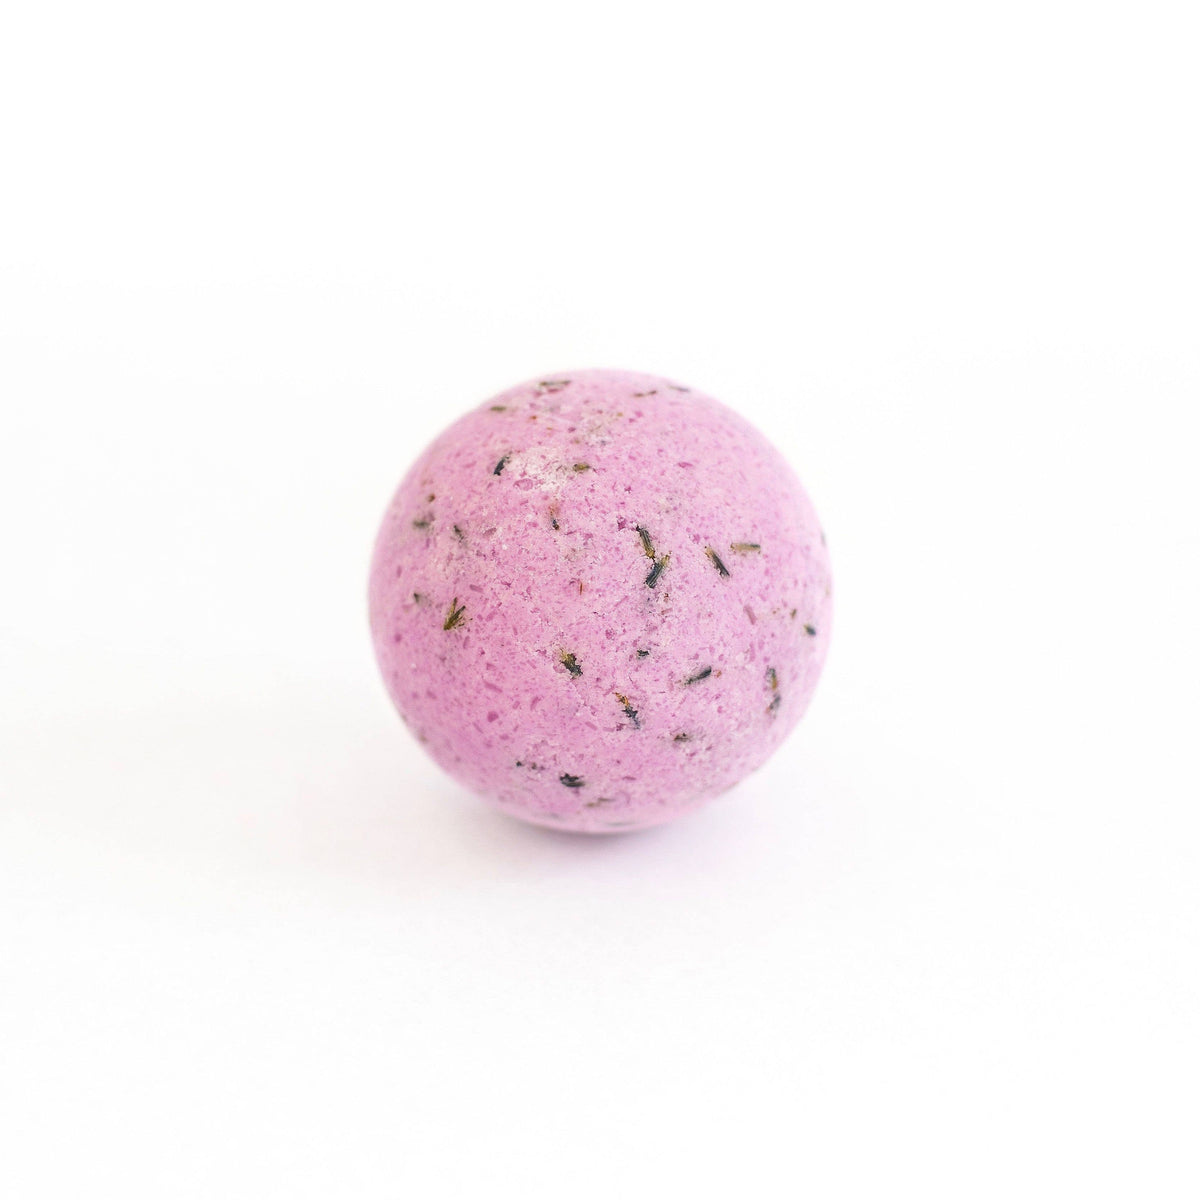 A SOAK Bath Co. Lavender Bath Bomb with specks of black and green, placed centrally on a plain white background.